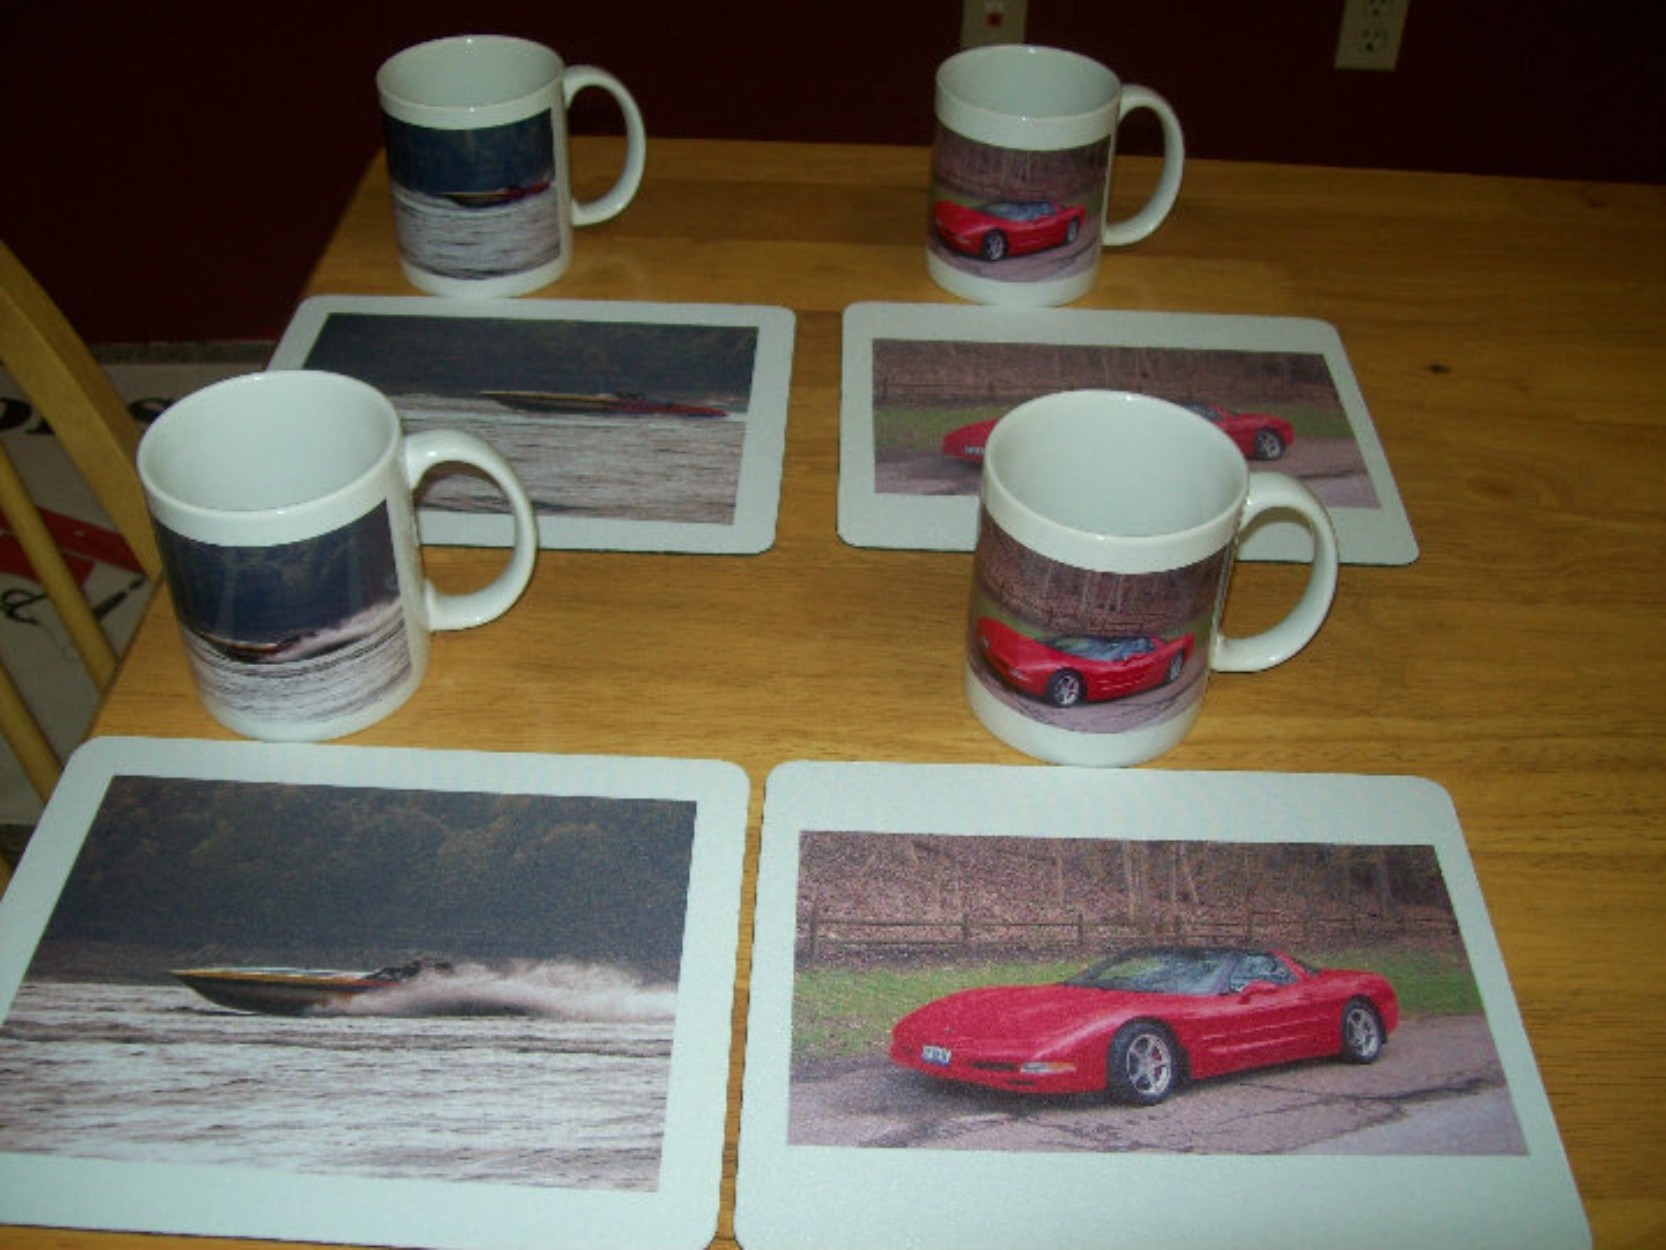 coffee mugs and mousepads made with sublimation printing